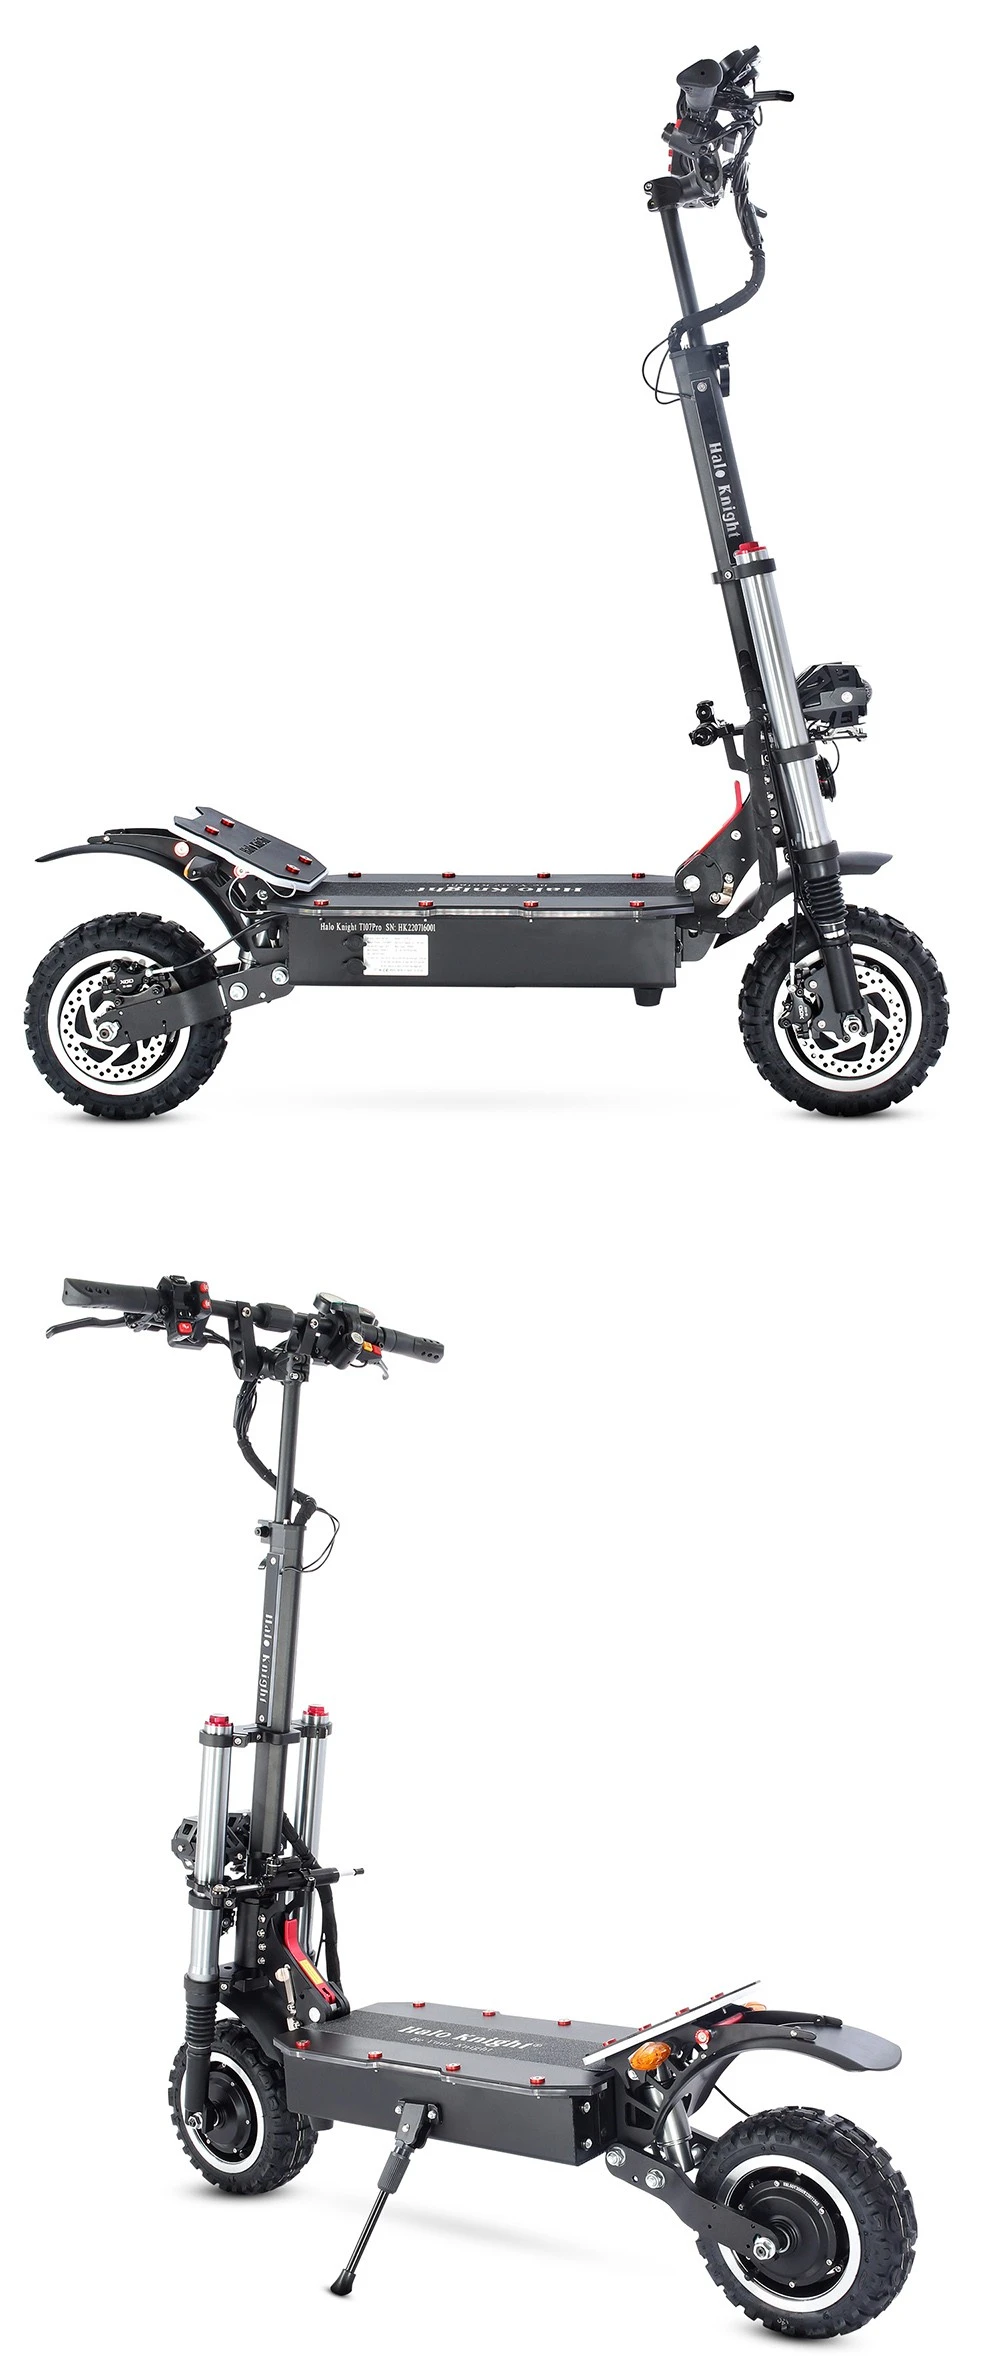 https://img.gkbcdn.com/d/202210/Halo-Knight-T107-Pro-Electric-Scooter-11---Off-road-Tire-517422-14._p1_.jpg